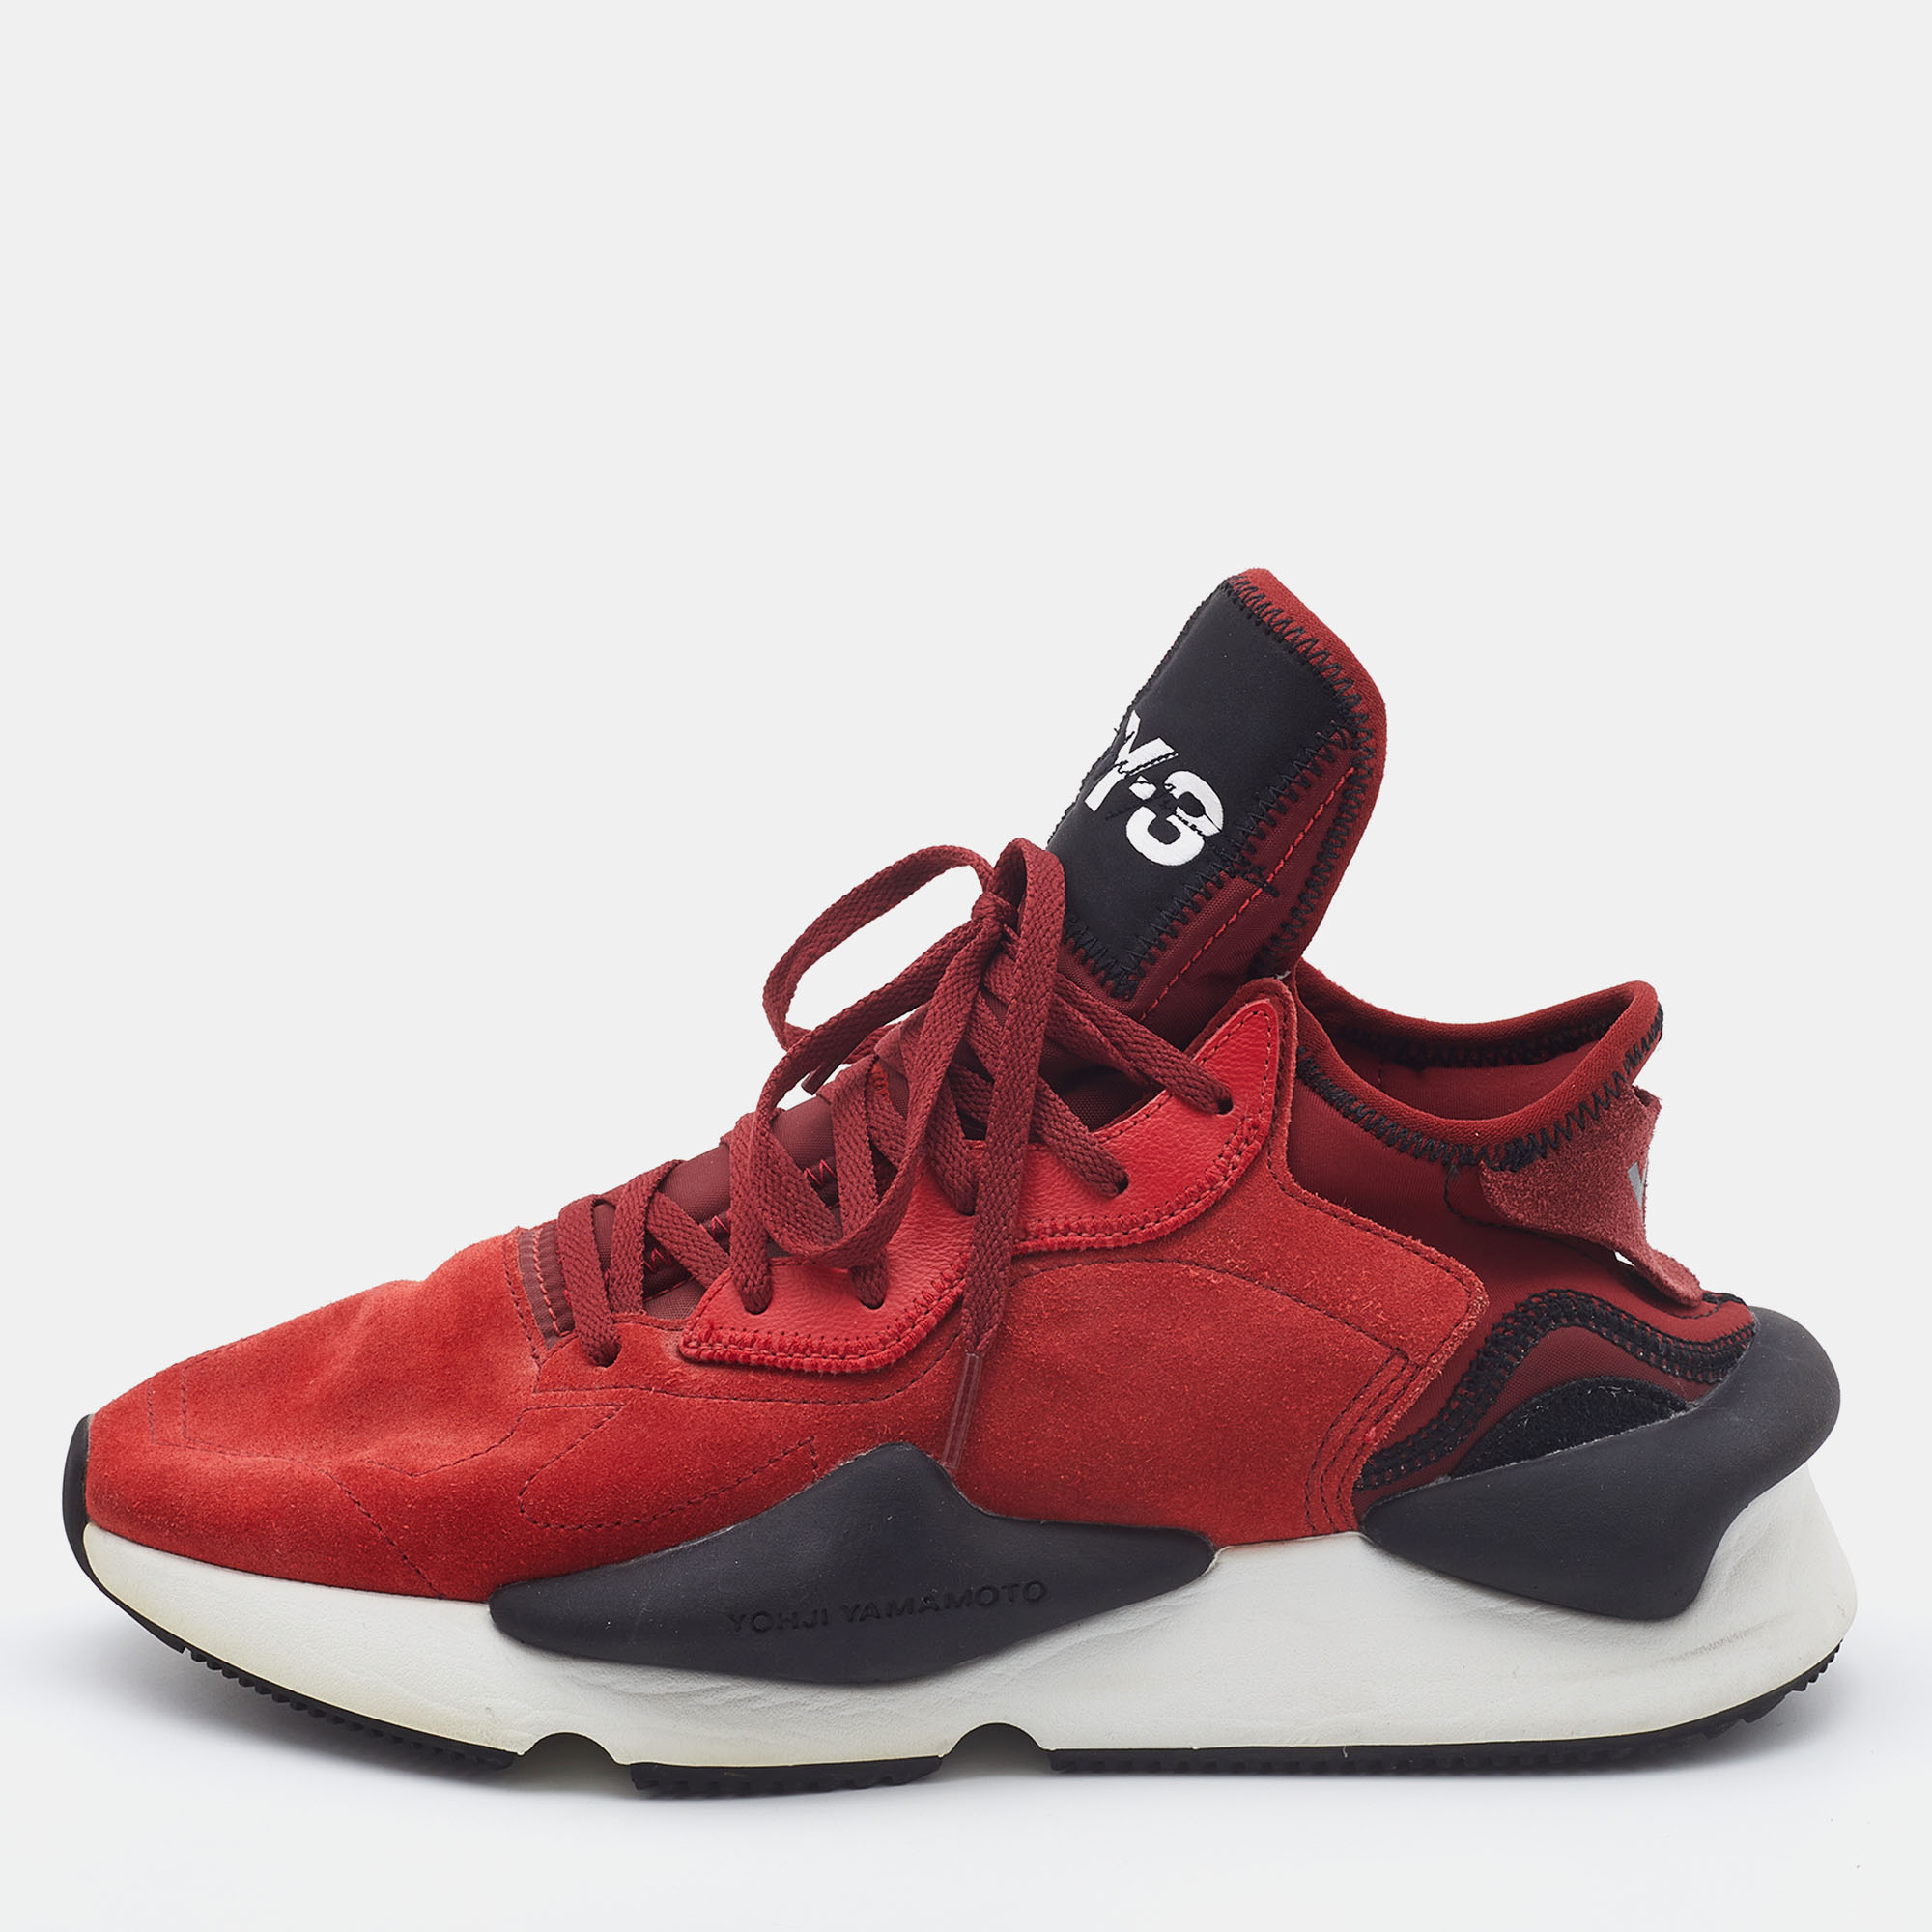 Y-3 Red/Black Suede And Fabric Kaiwa Sneakers Size 43.5